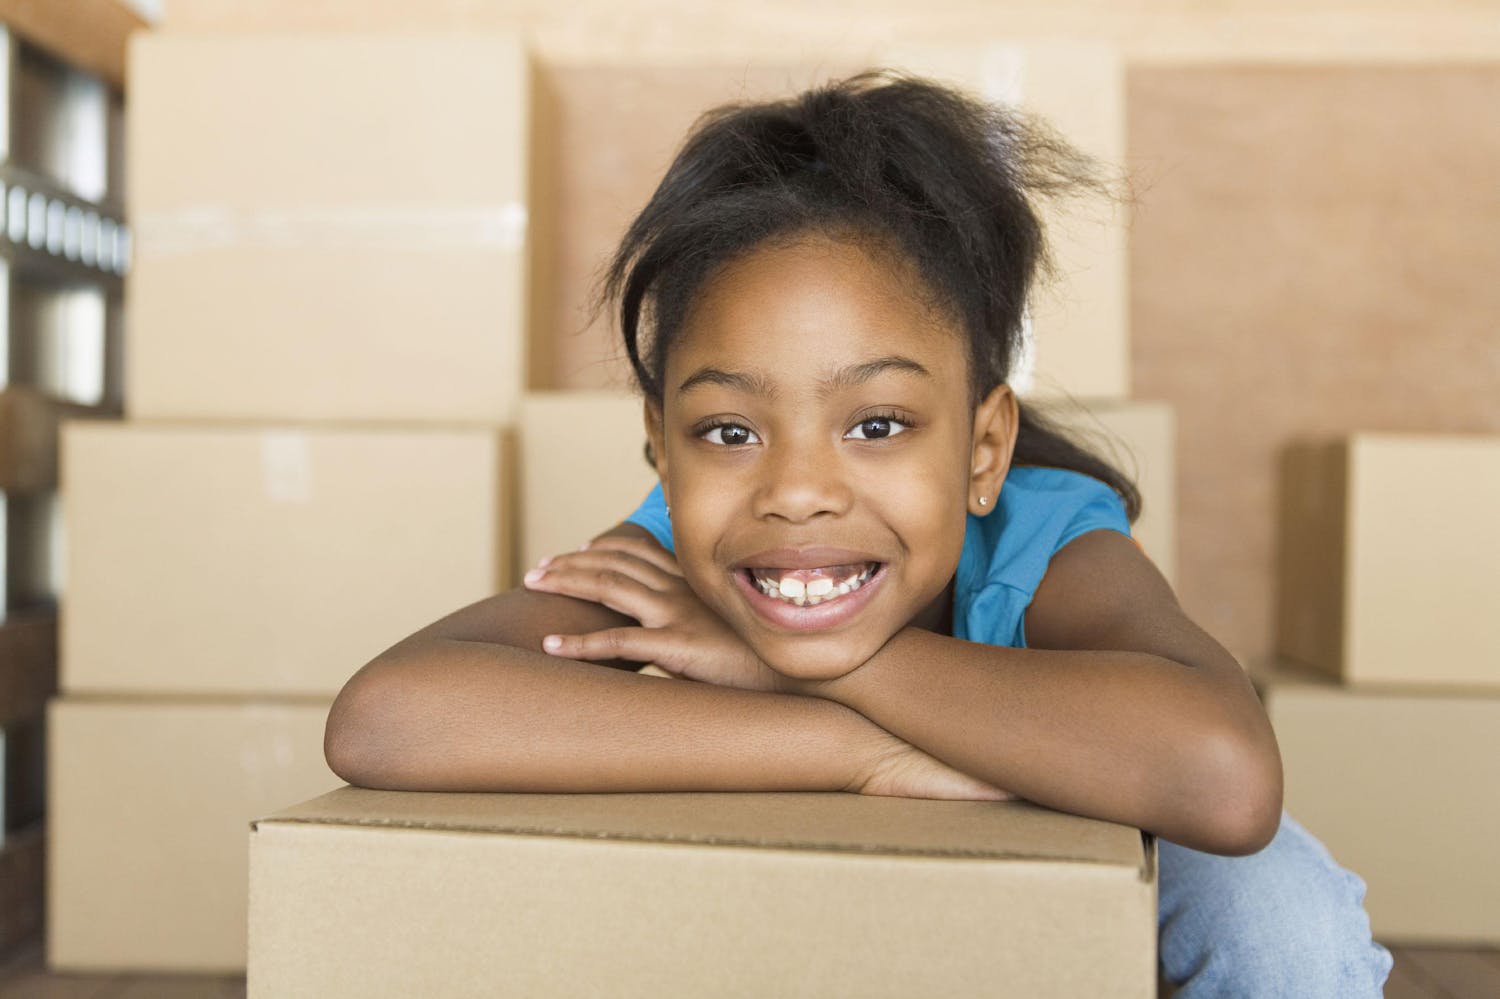 Young girl smiling and leaning on moving box in a room full of boxes